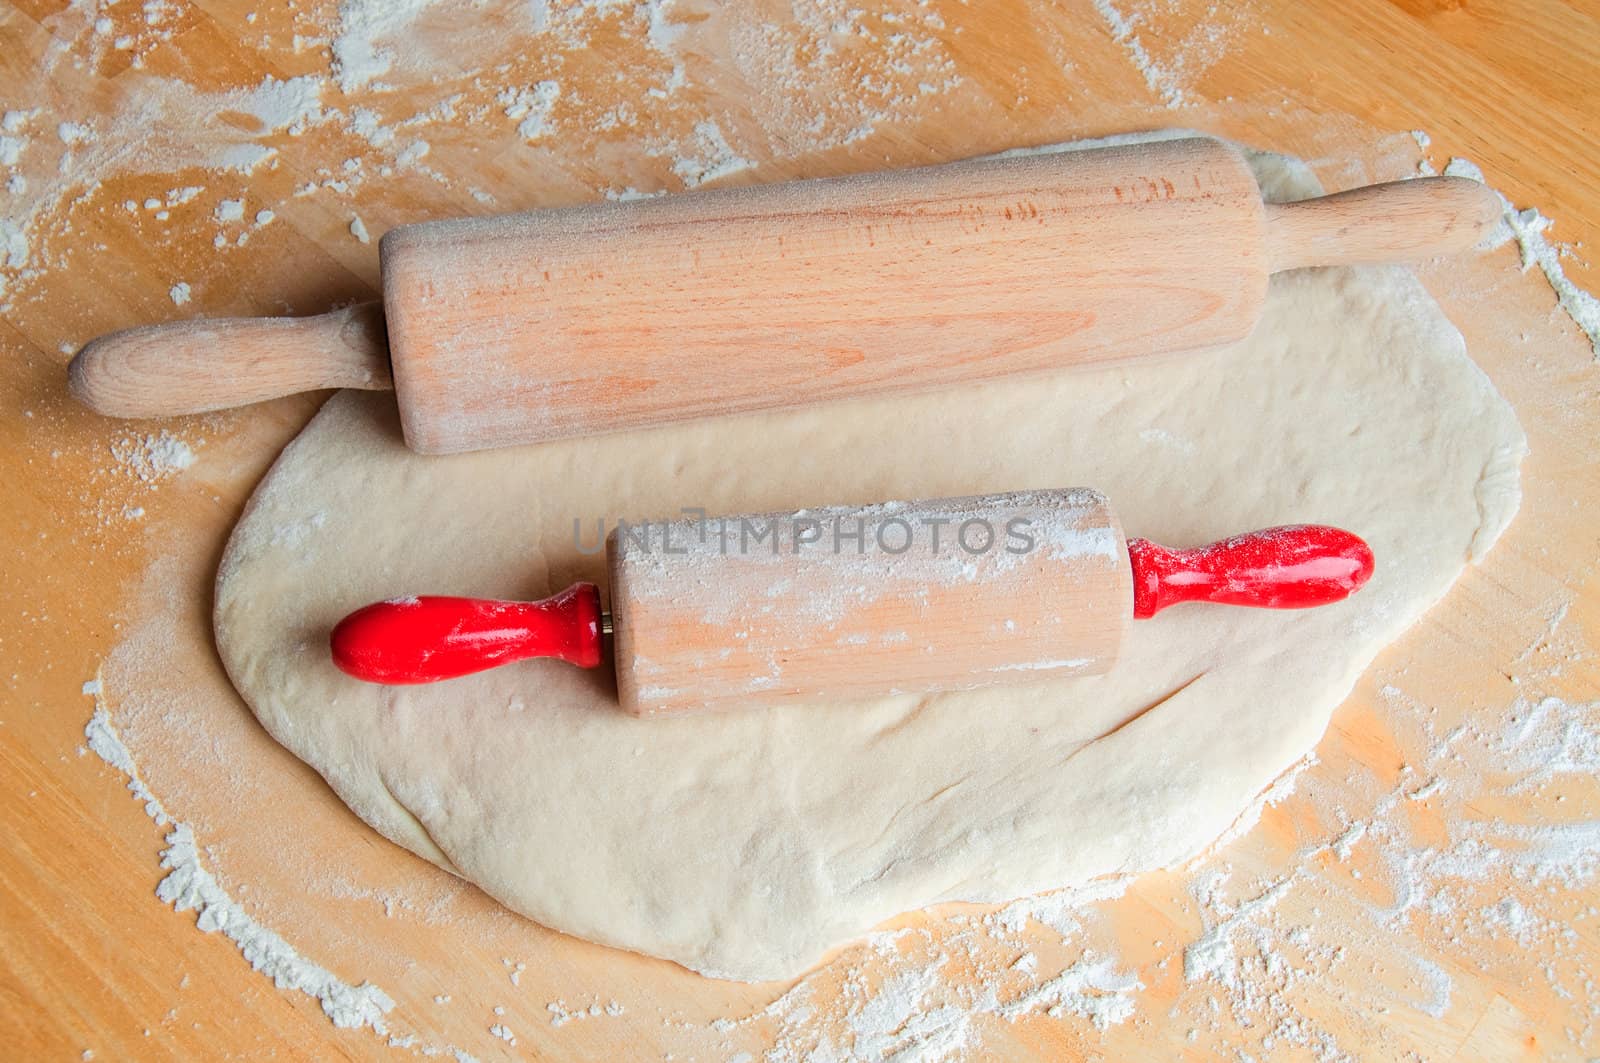 One adult rolling pin and one for children